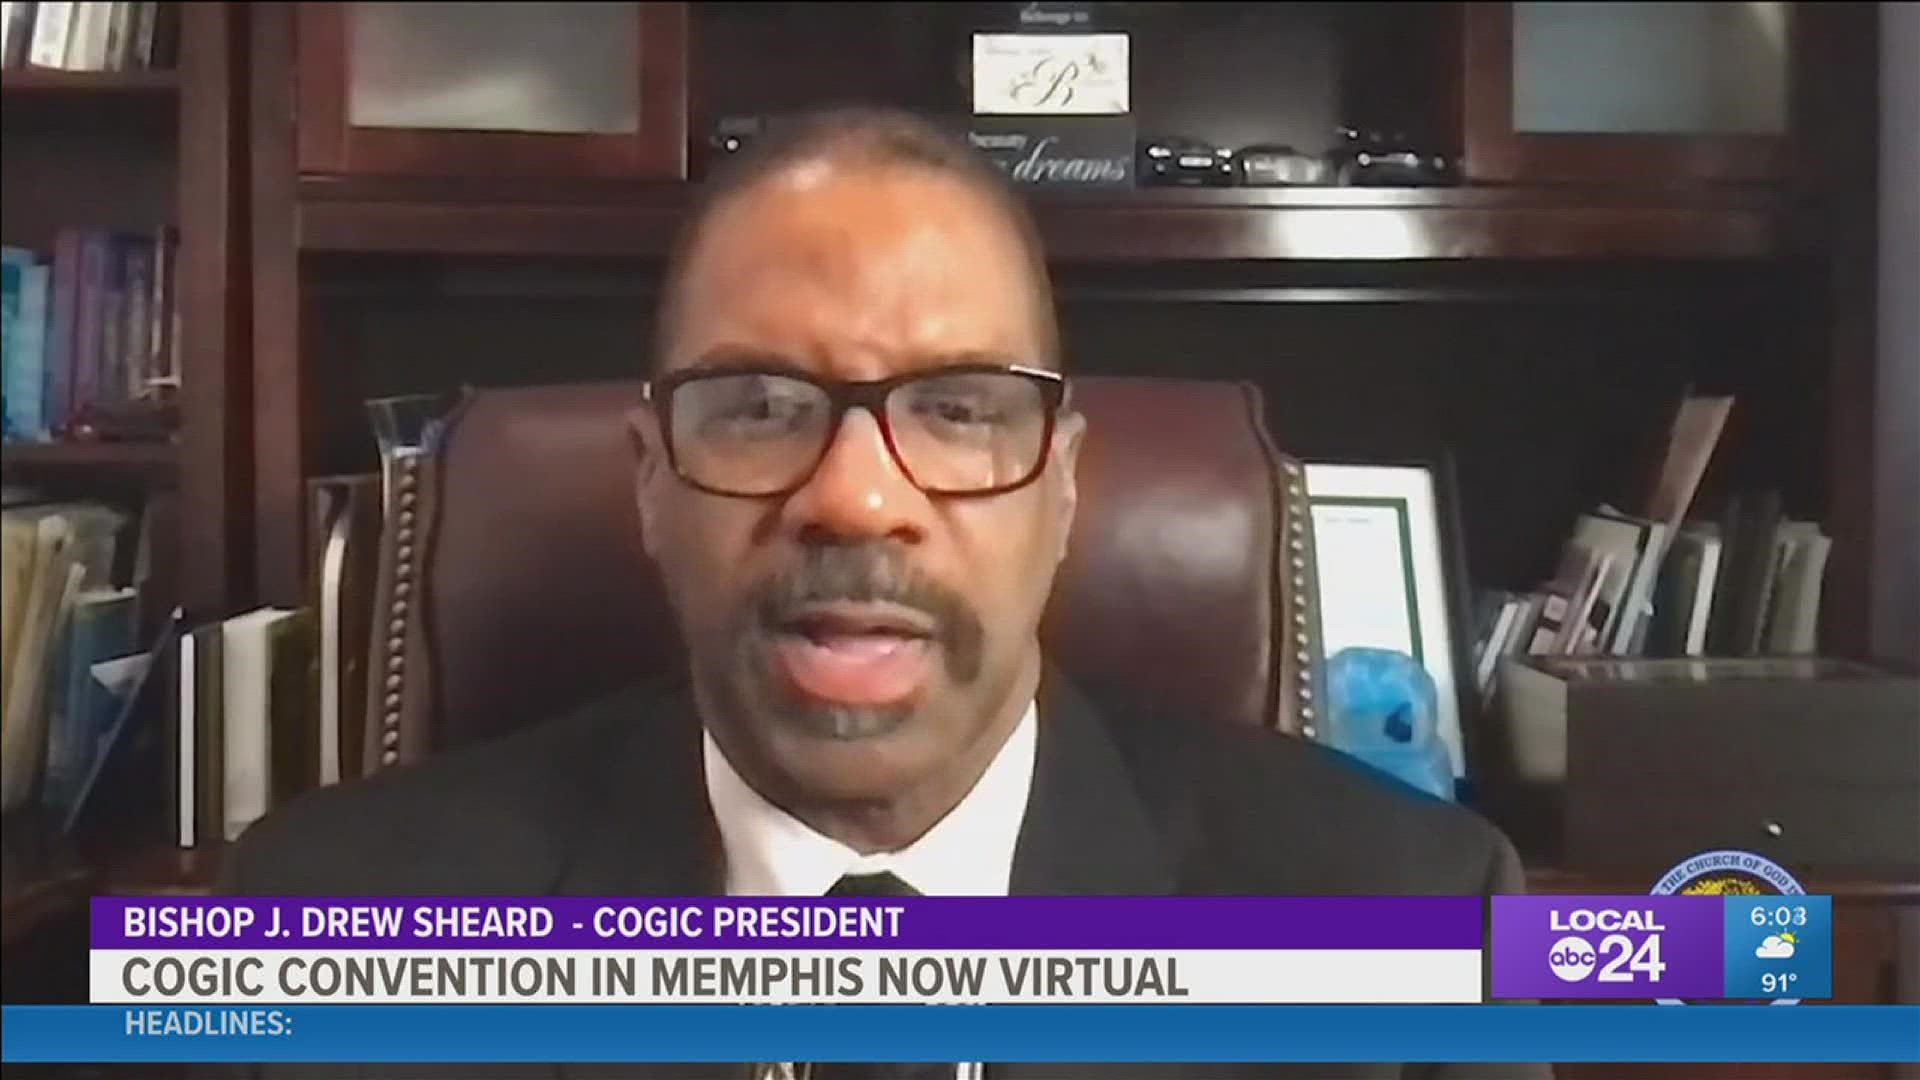 COGIC said the move from in-person to virtual was due to COVID-19, and they are discouraging people from traveling to Memphis.